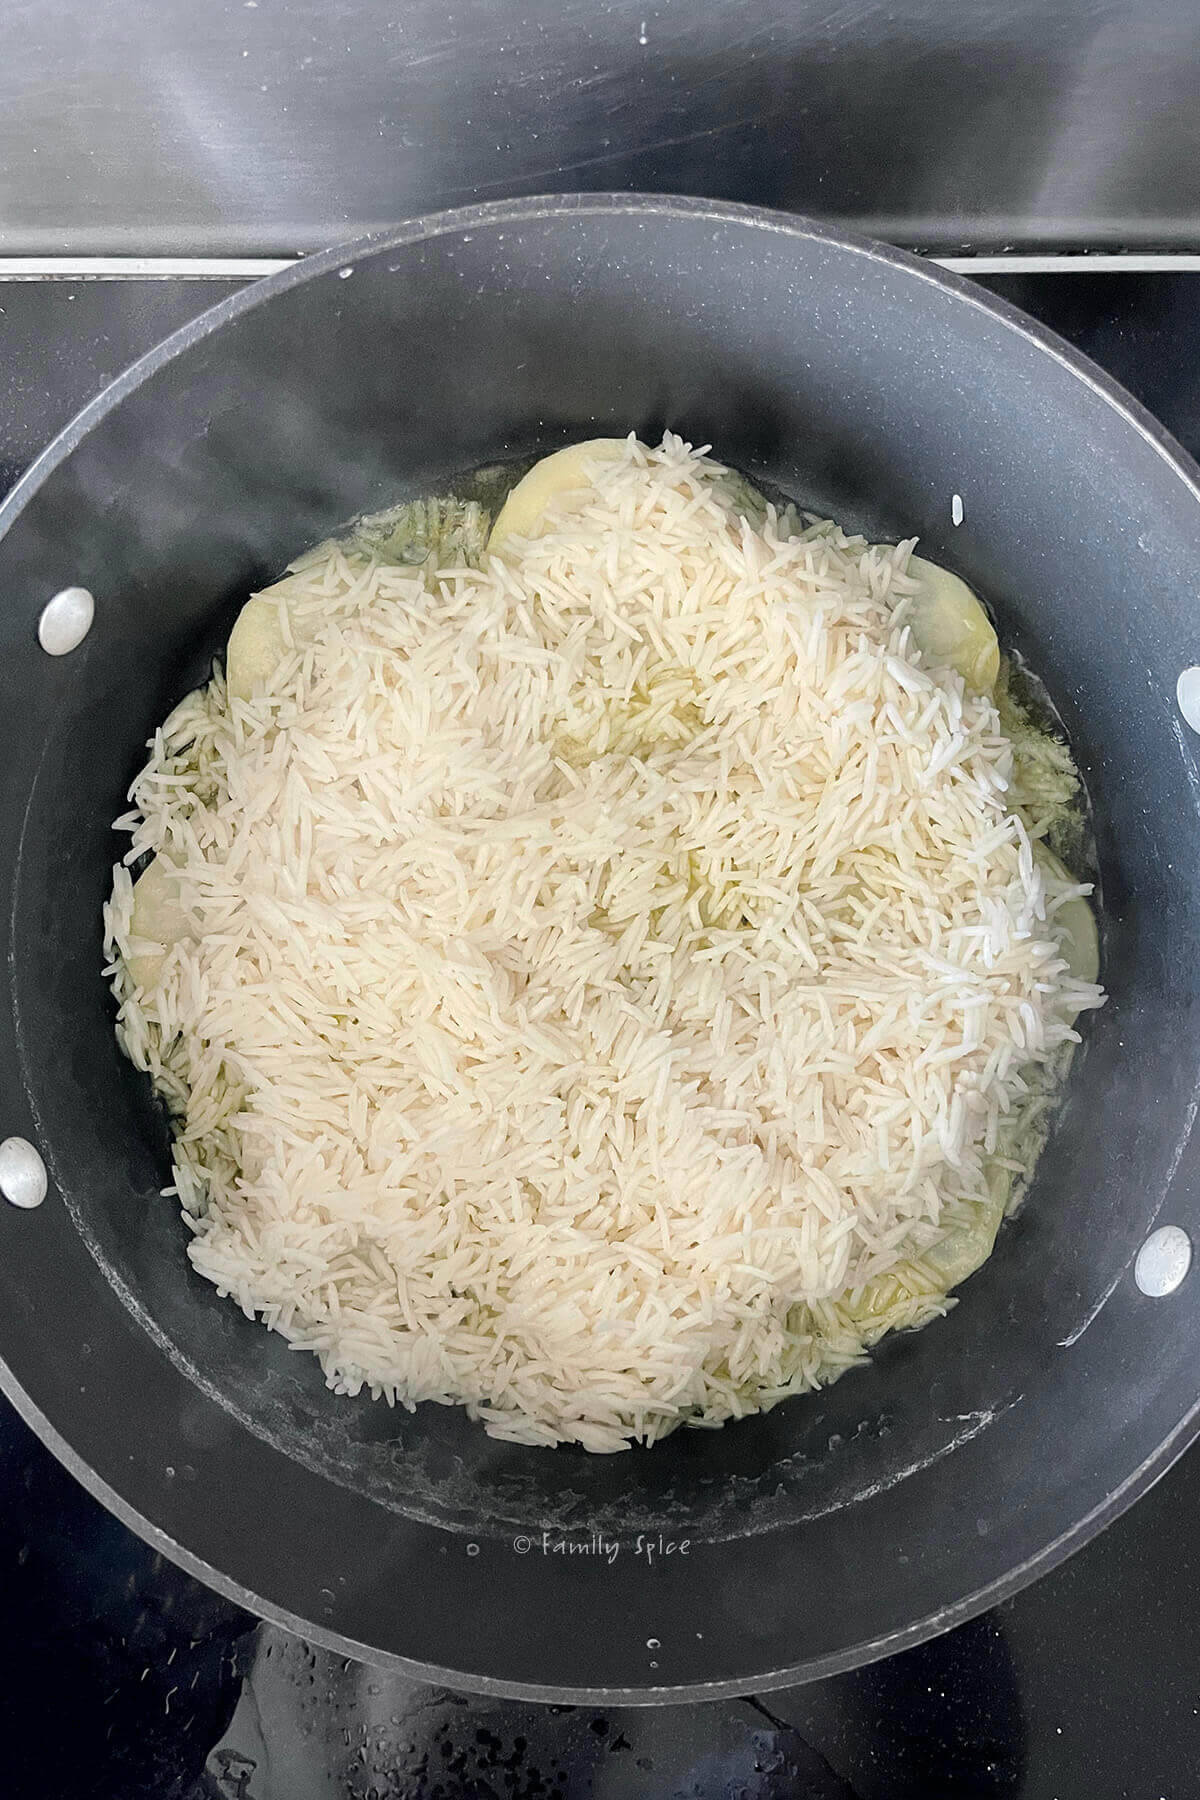 Top view of a non-stick pot with potato slices on the bottom and a layer of parboiled basmati rice